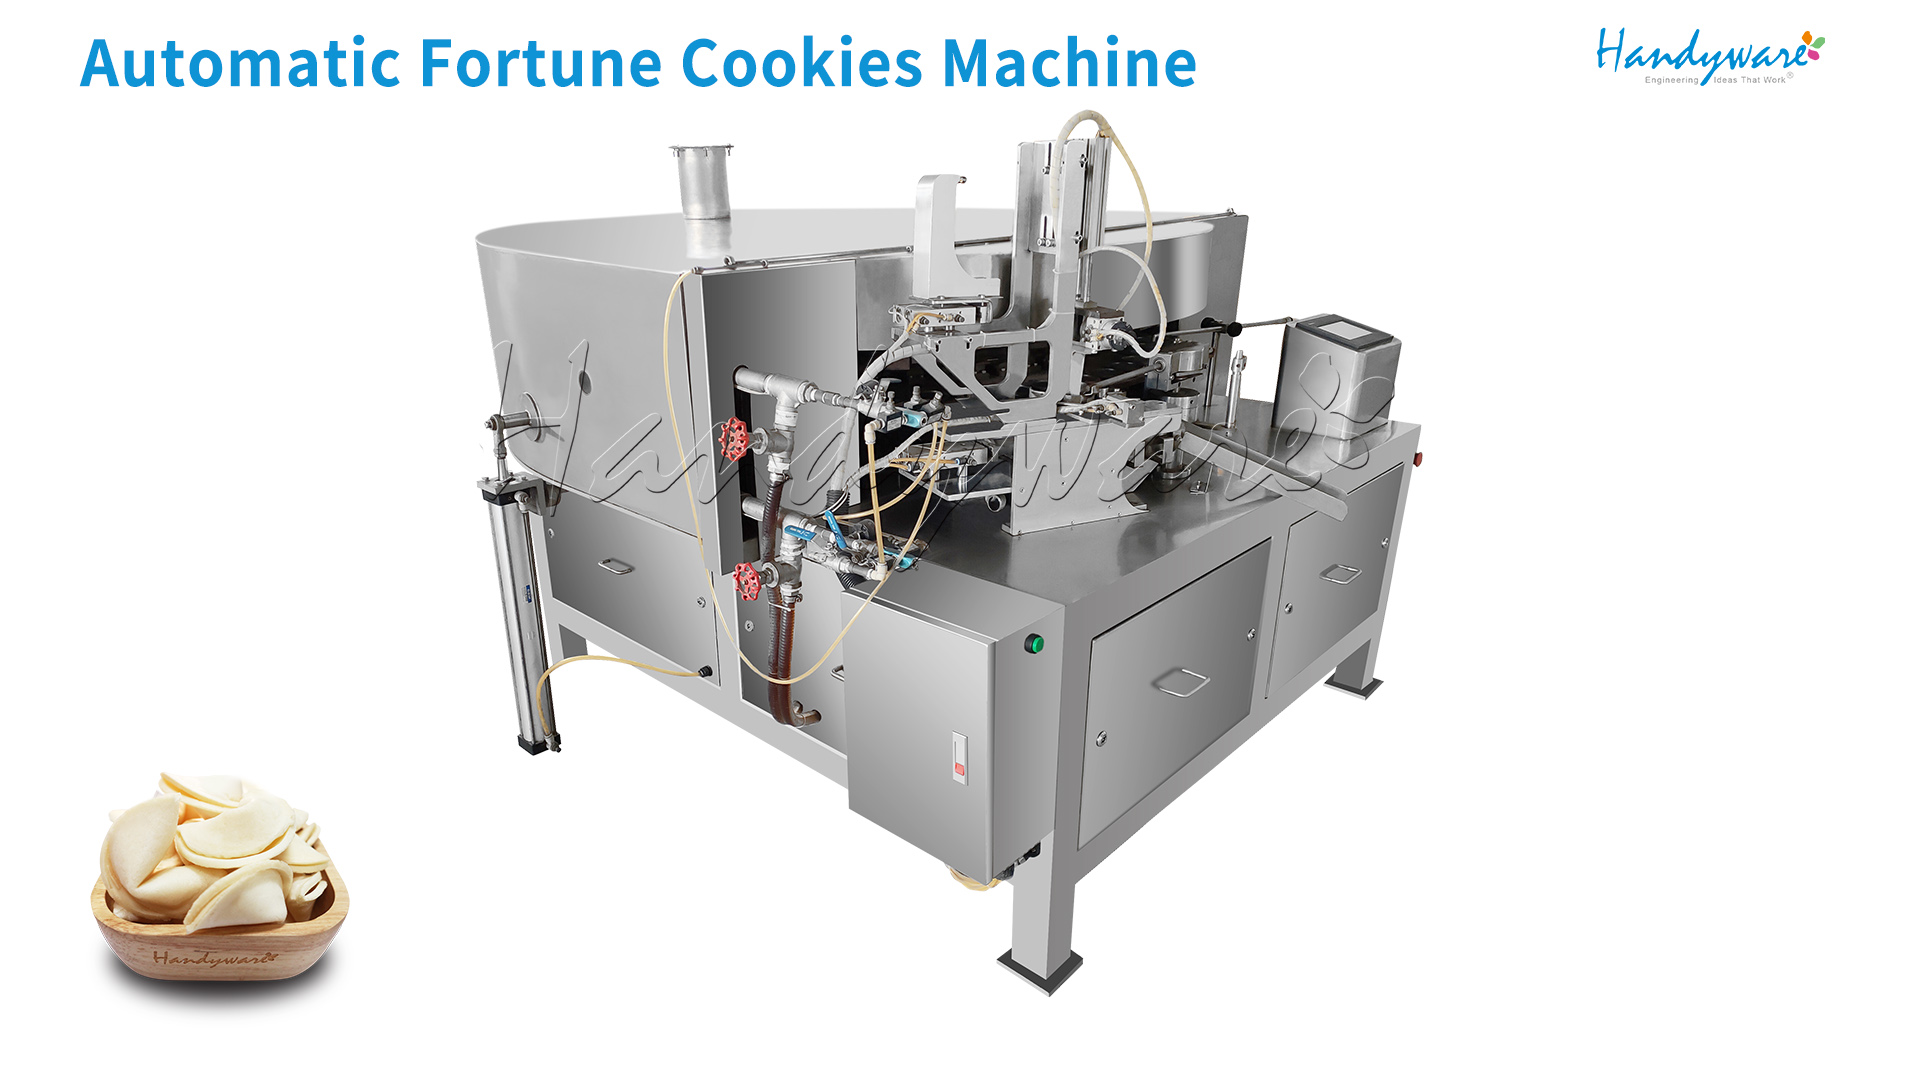 Automatic Fortune Cookies Machine